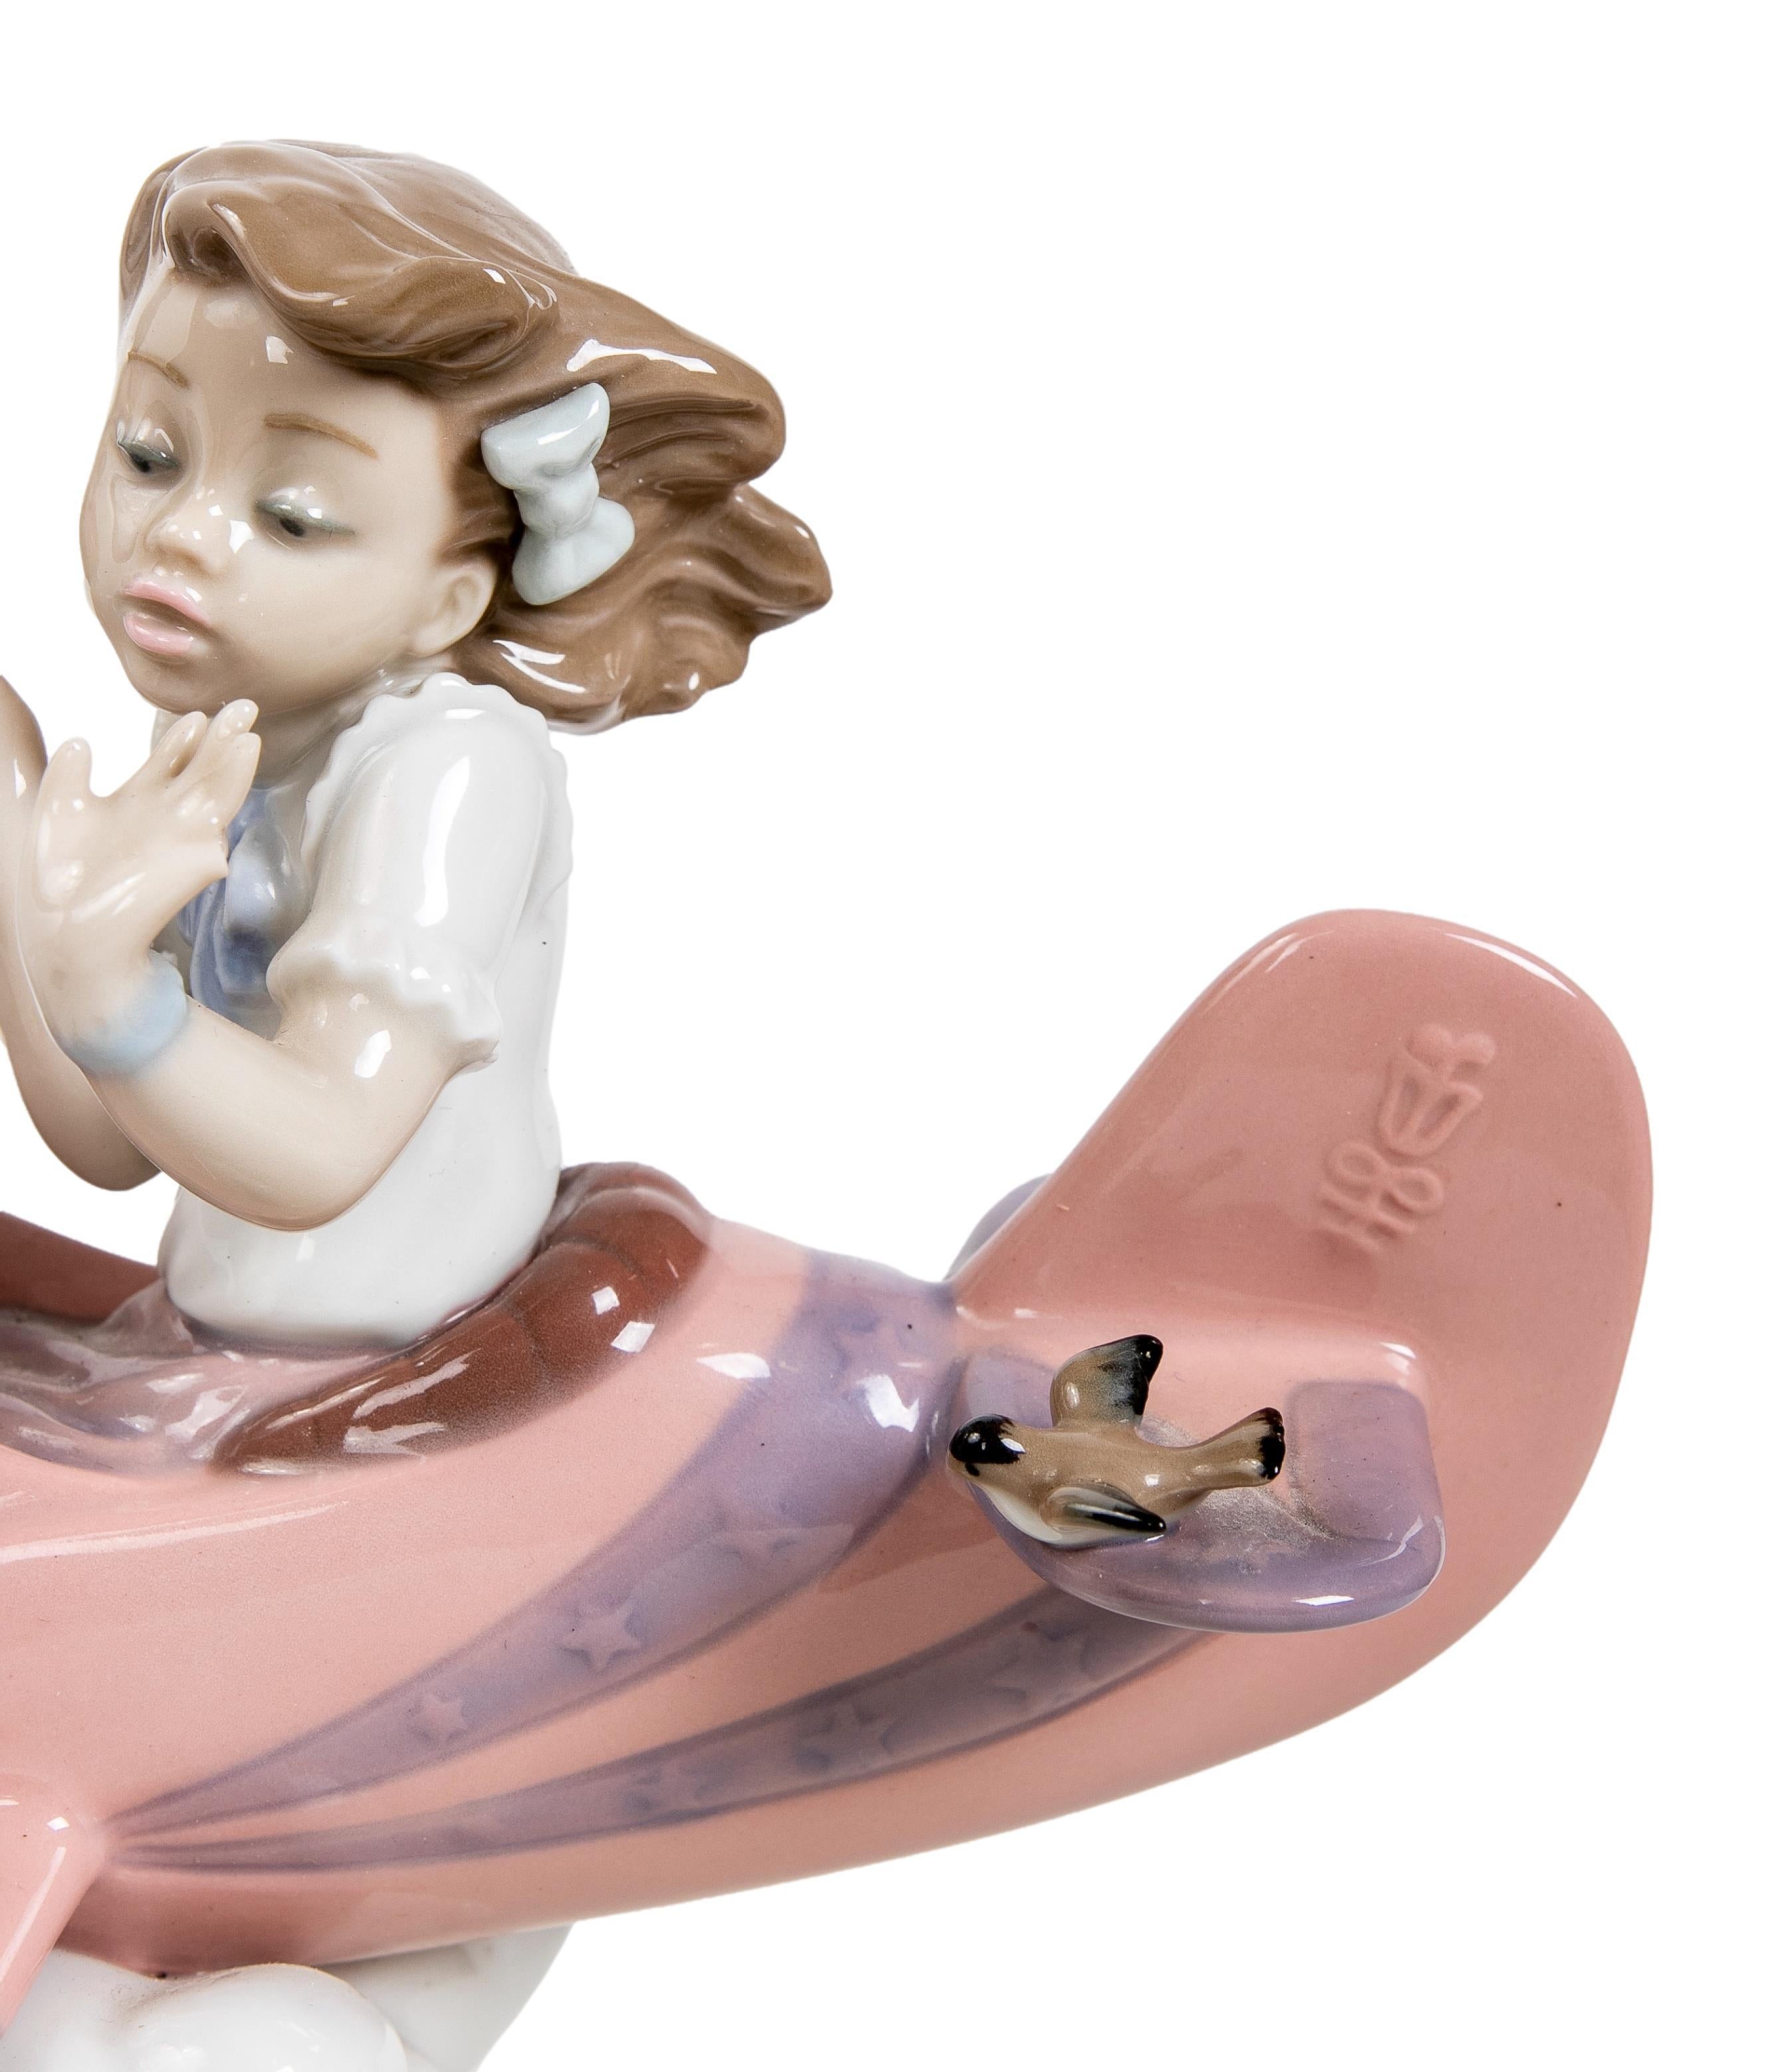 1989 Porcelain Figure of Children in Airplane Signed by the House of LLadró For Sale 4